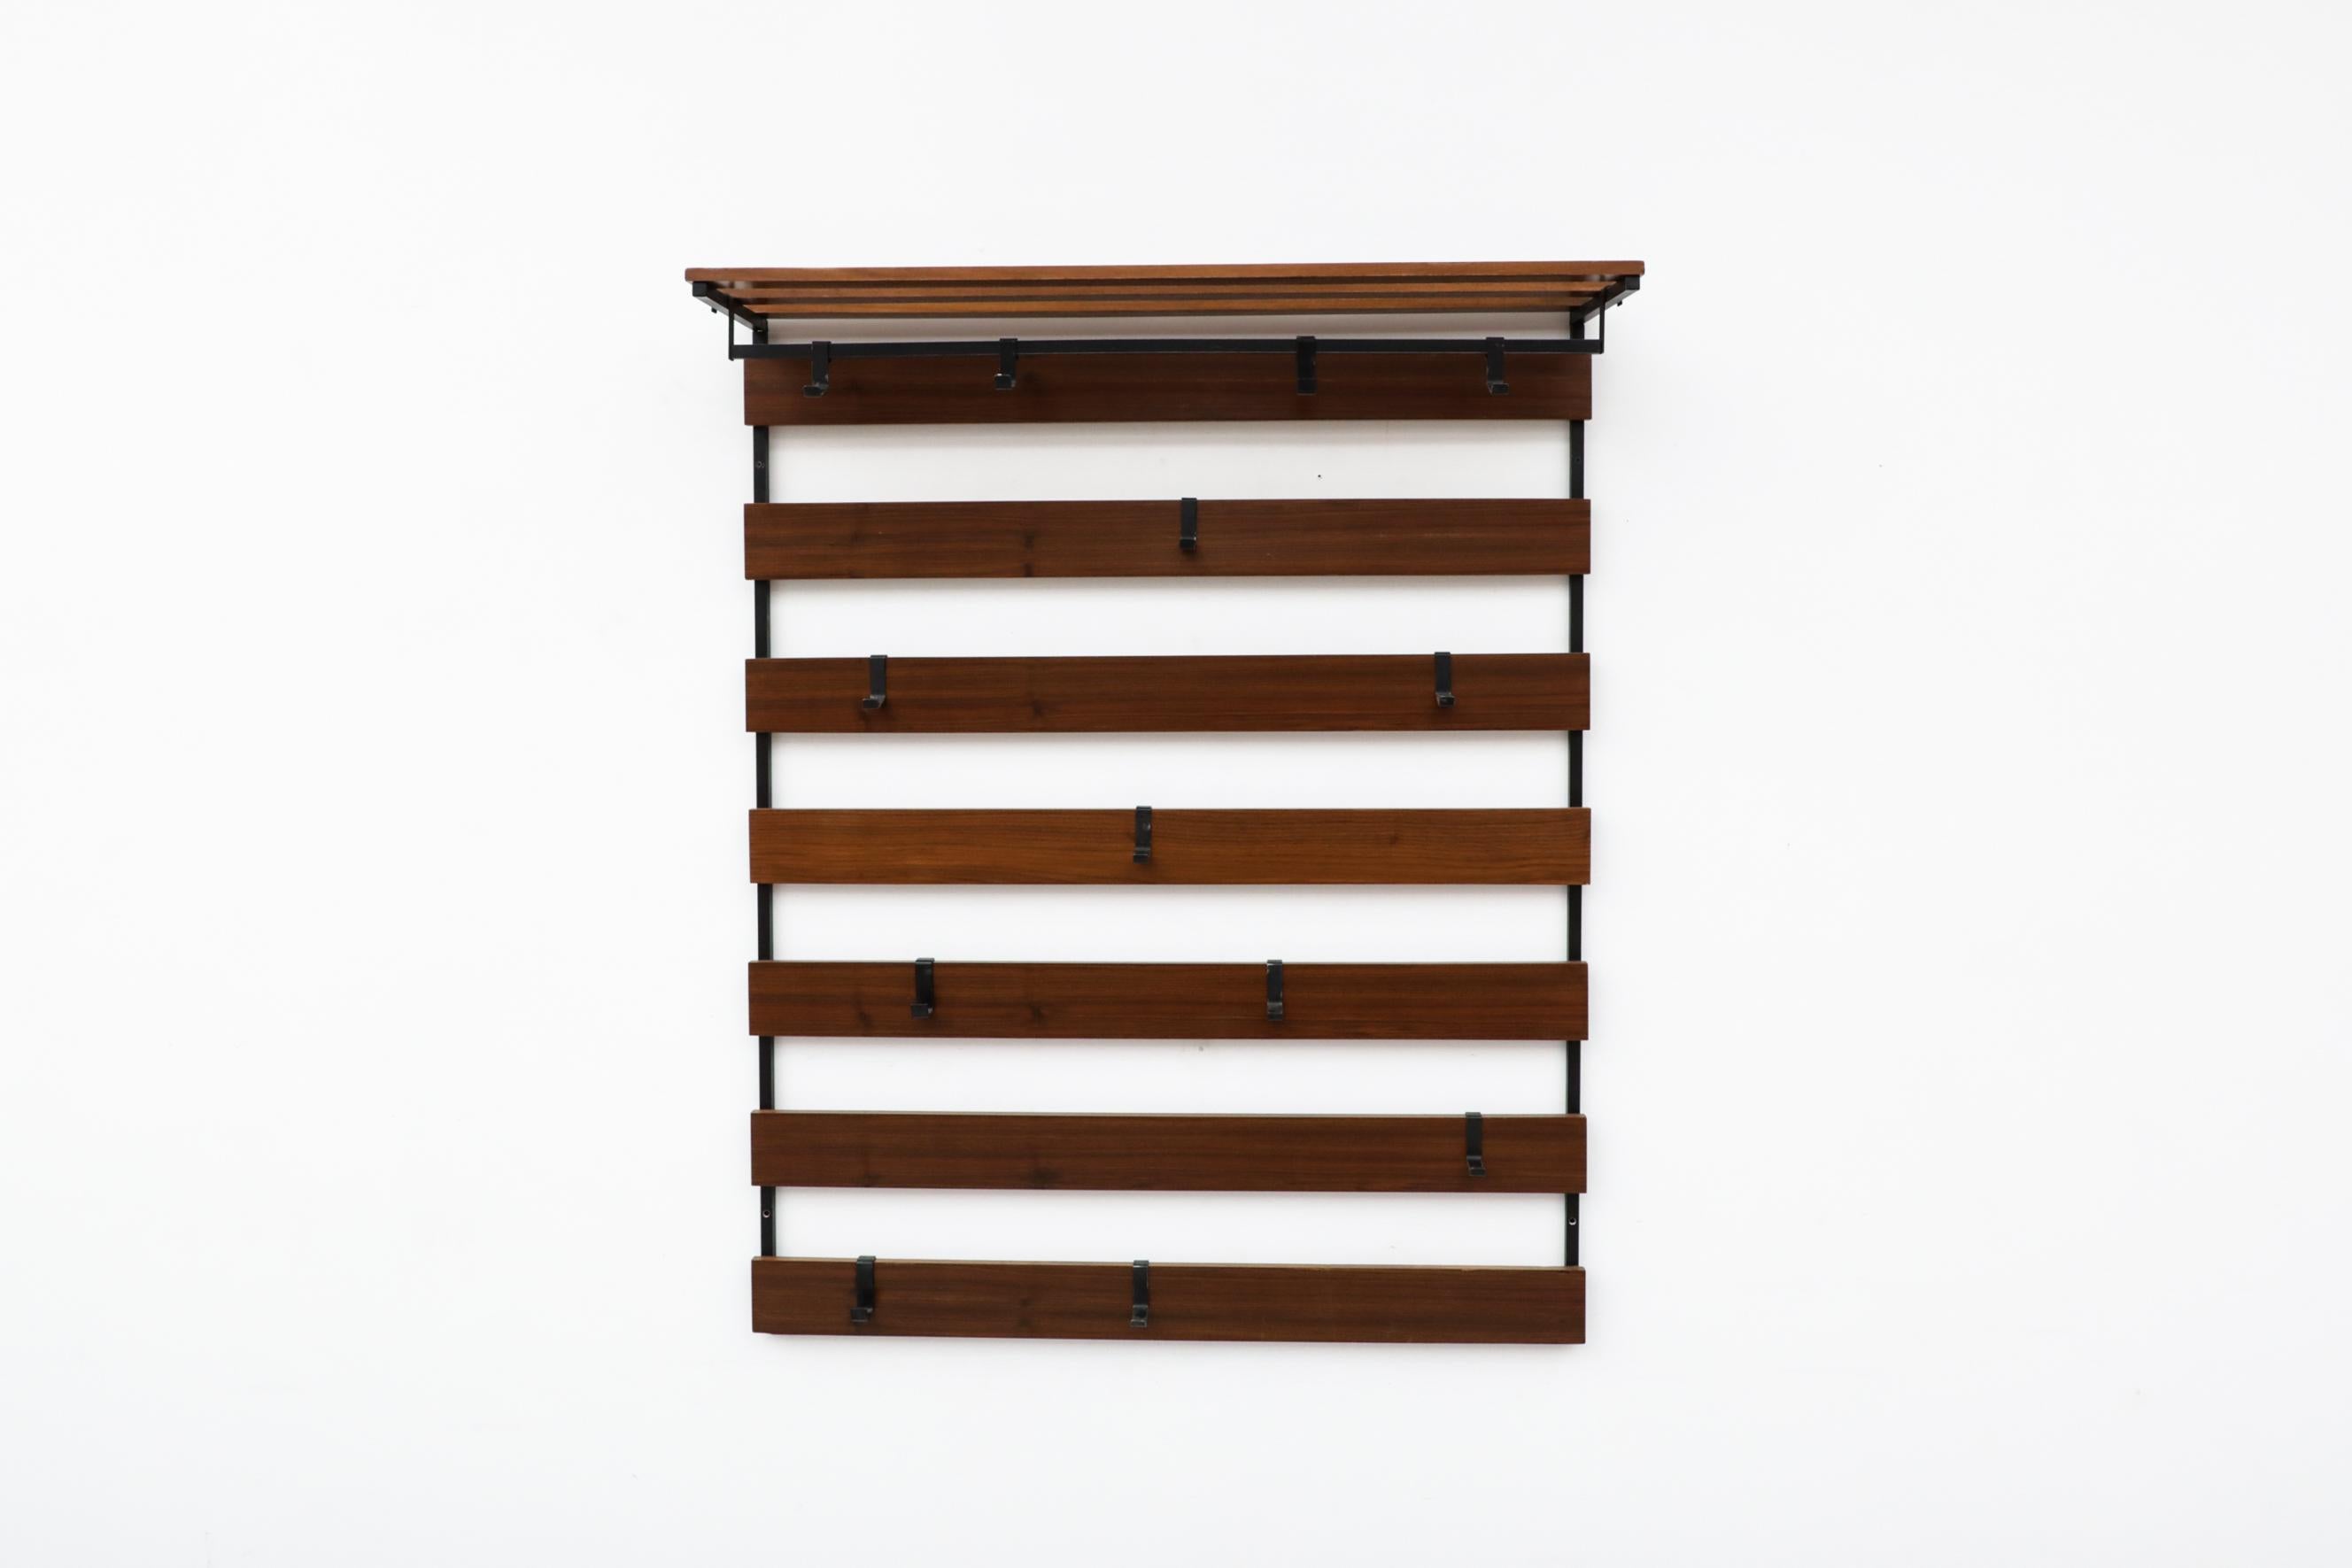 Midcentury teak slatted wall mount coat rack with hat shelf and 13 black moveable hooks. In original condition with visible wear and patina including some enamel loss. Wear is consistent with its age and use. Other wall-mounted coat racks are